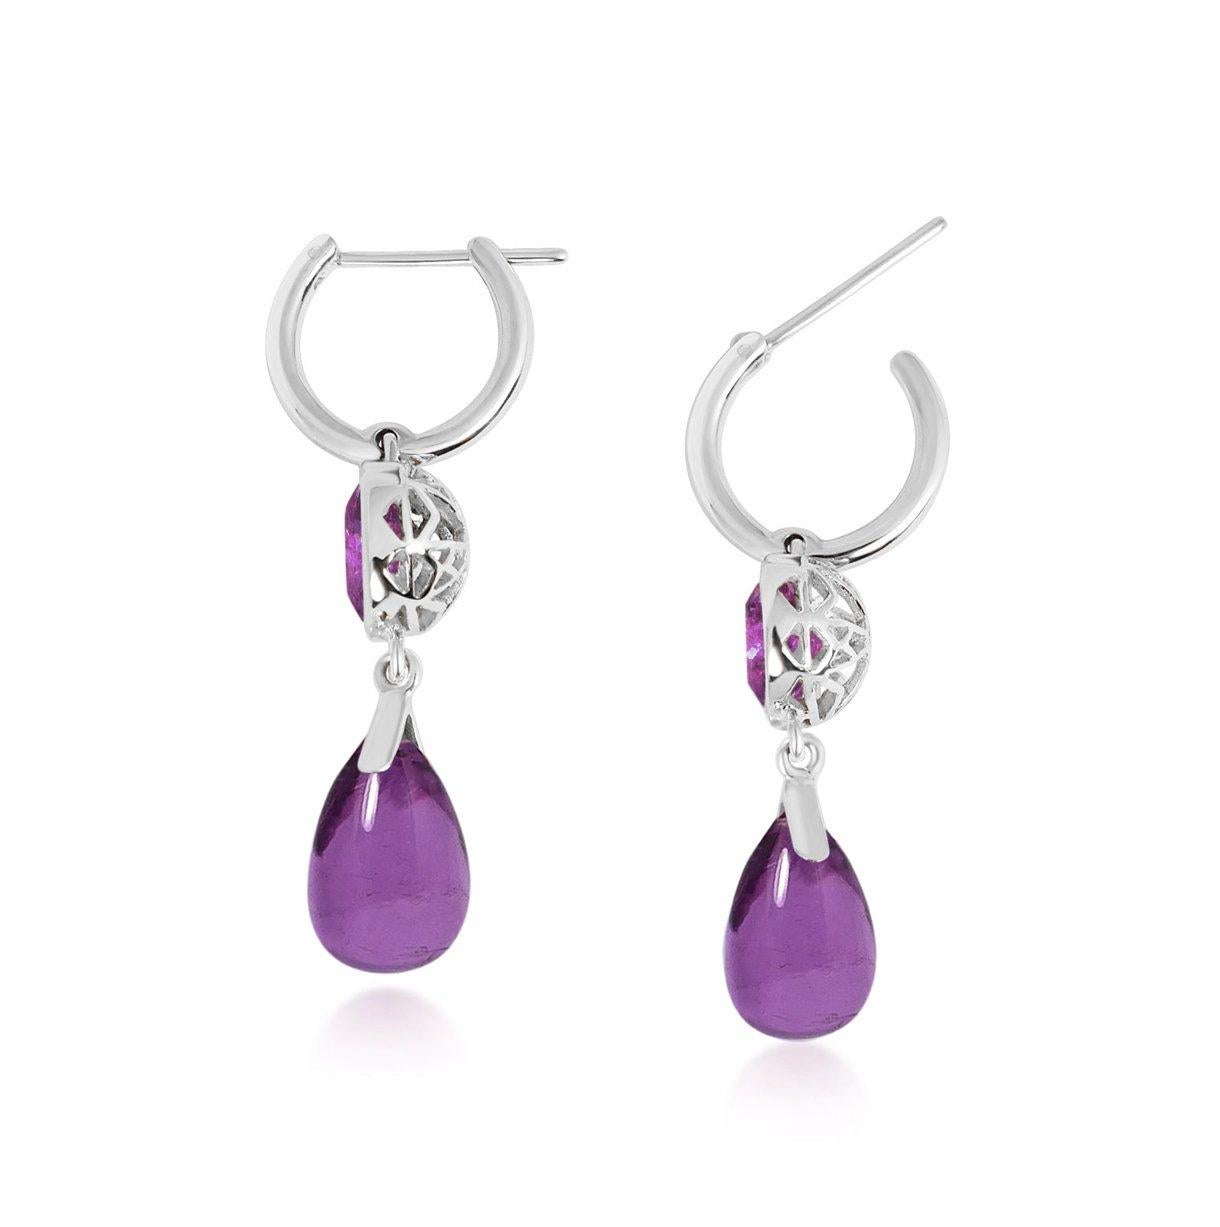 Handcrafted 2.40 & 6.20 Carats Amethysts 18 Karat White Gold Drop Earrings. Dancing drops carved in Amethyst under a set of 8mm round cut Amethyst stones encased in our iconic hand pierced gold lace to let the light through. A diamond has been set